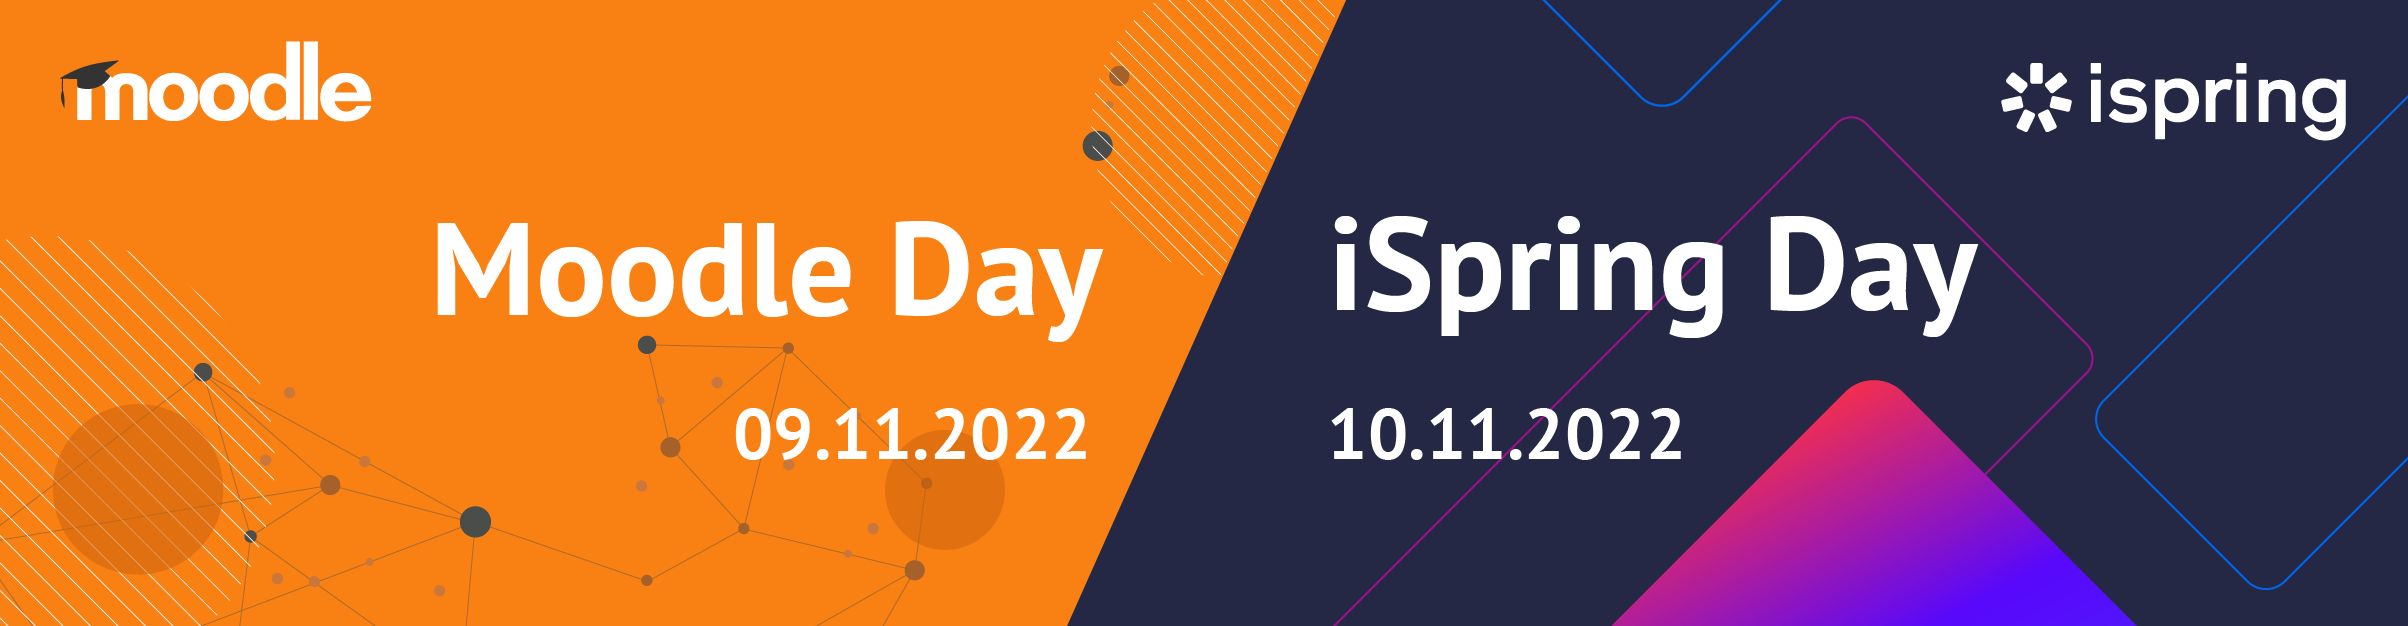 Moode Day / iSpring Day
9.11.2022 / 10.11.2022